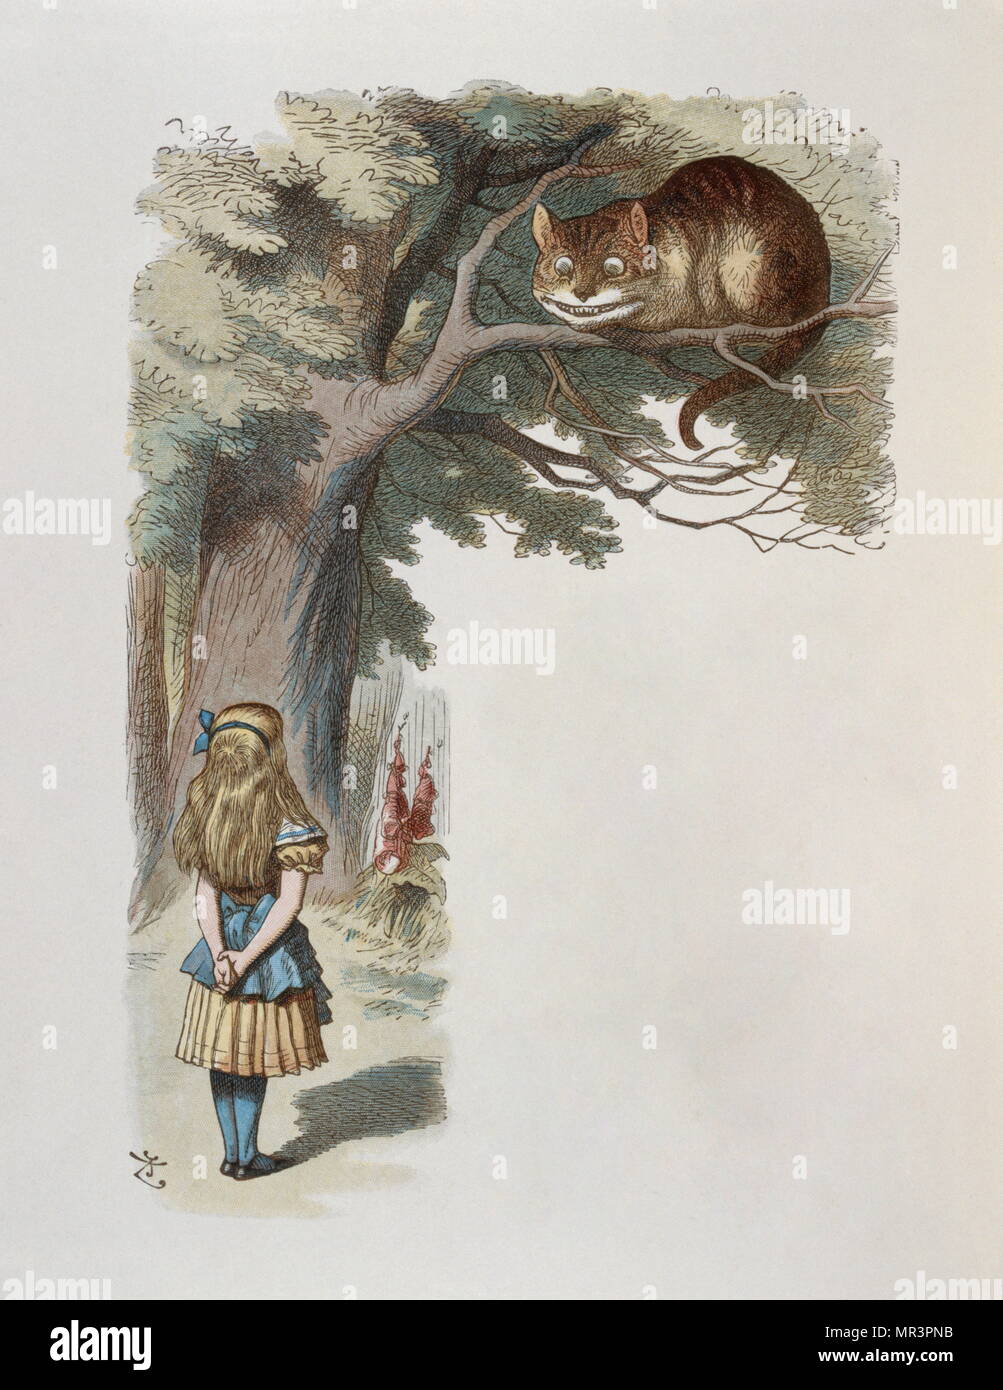 Illustration by Tenniel, from the 1890 edition of 'Alice in Wonderland' by Lewis Carroll. Stock Photo